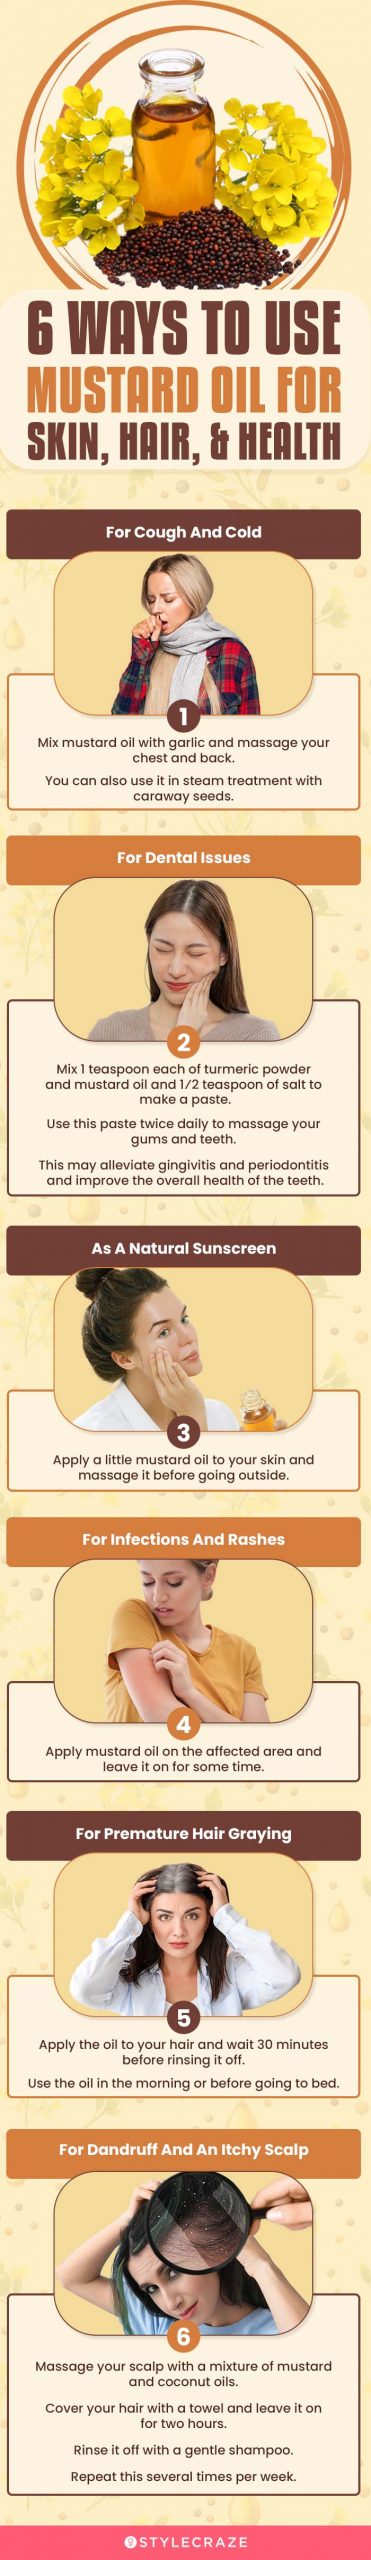 6 ways to use mustard oil for skin, hair, & health (infographic)